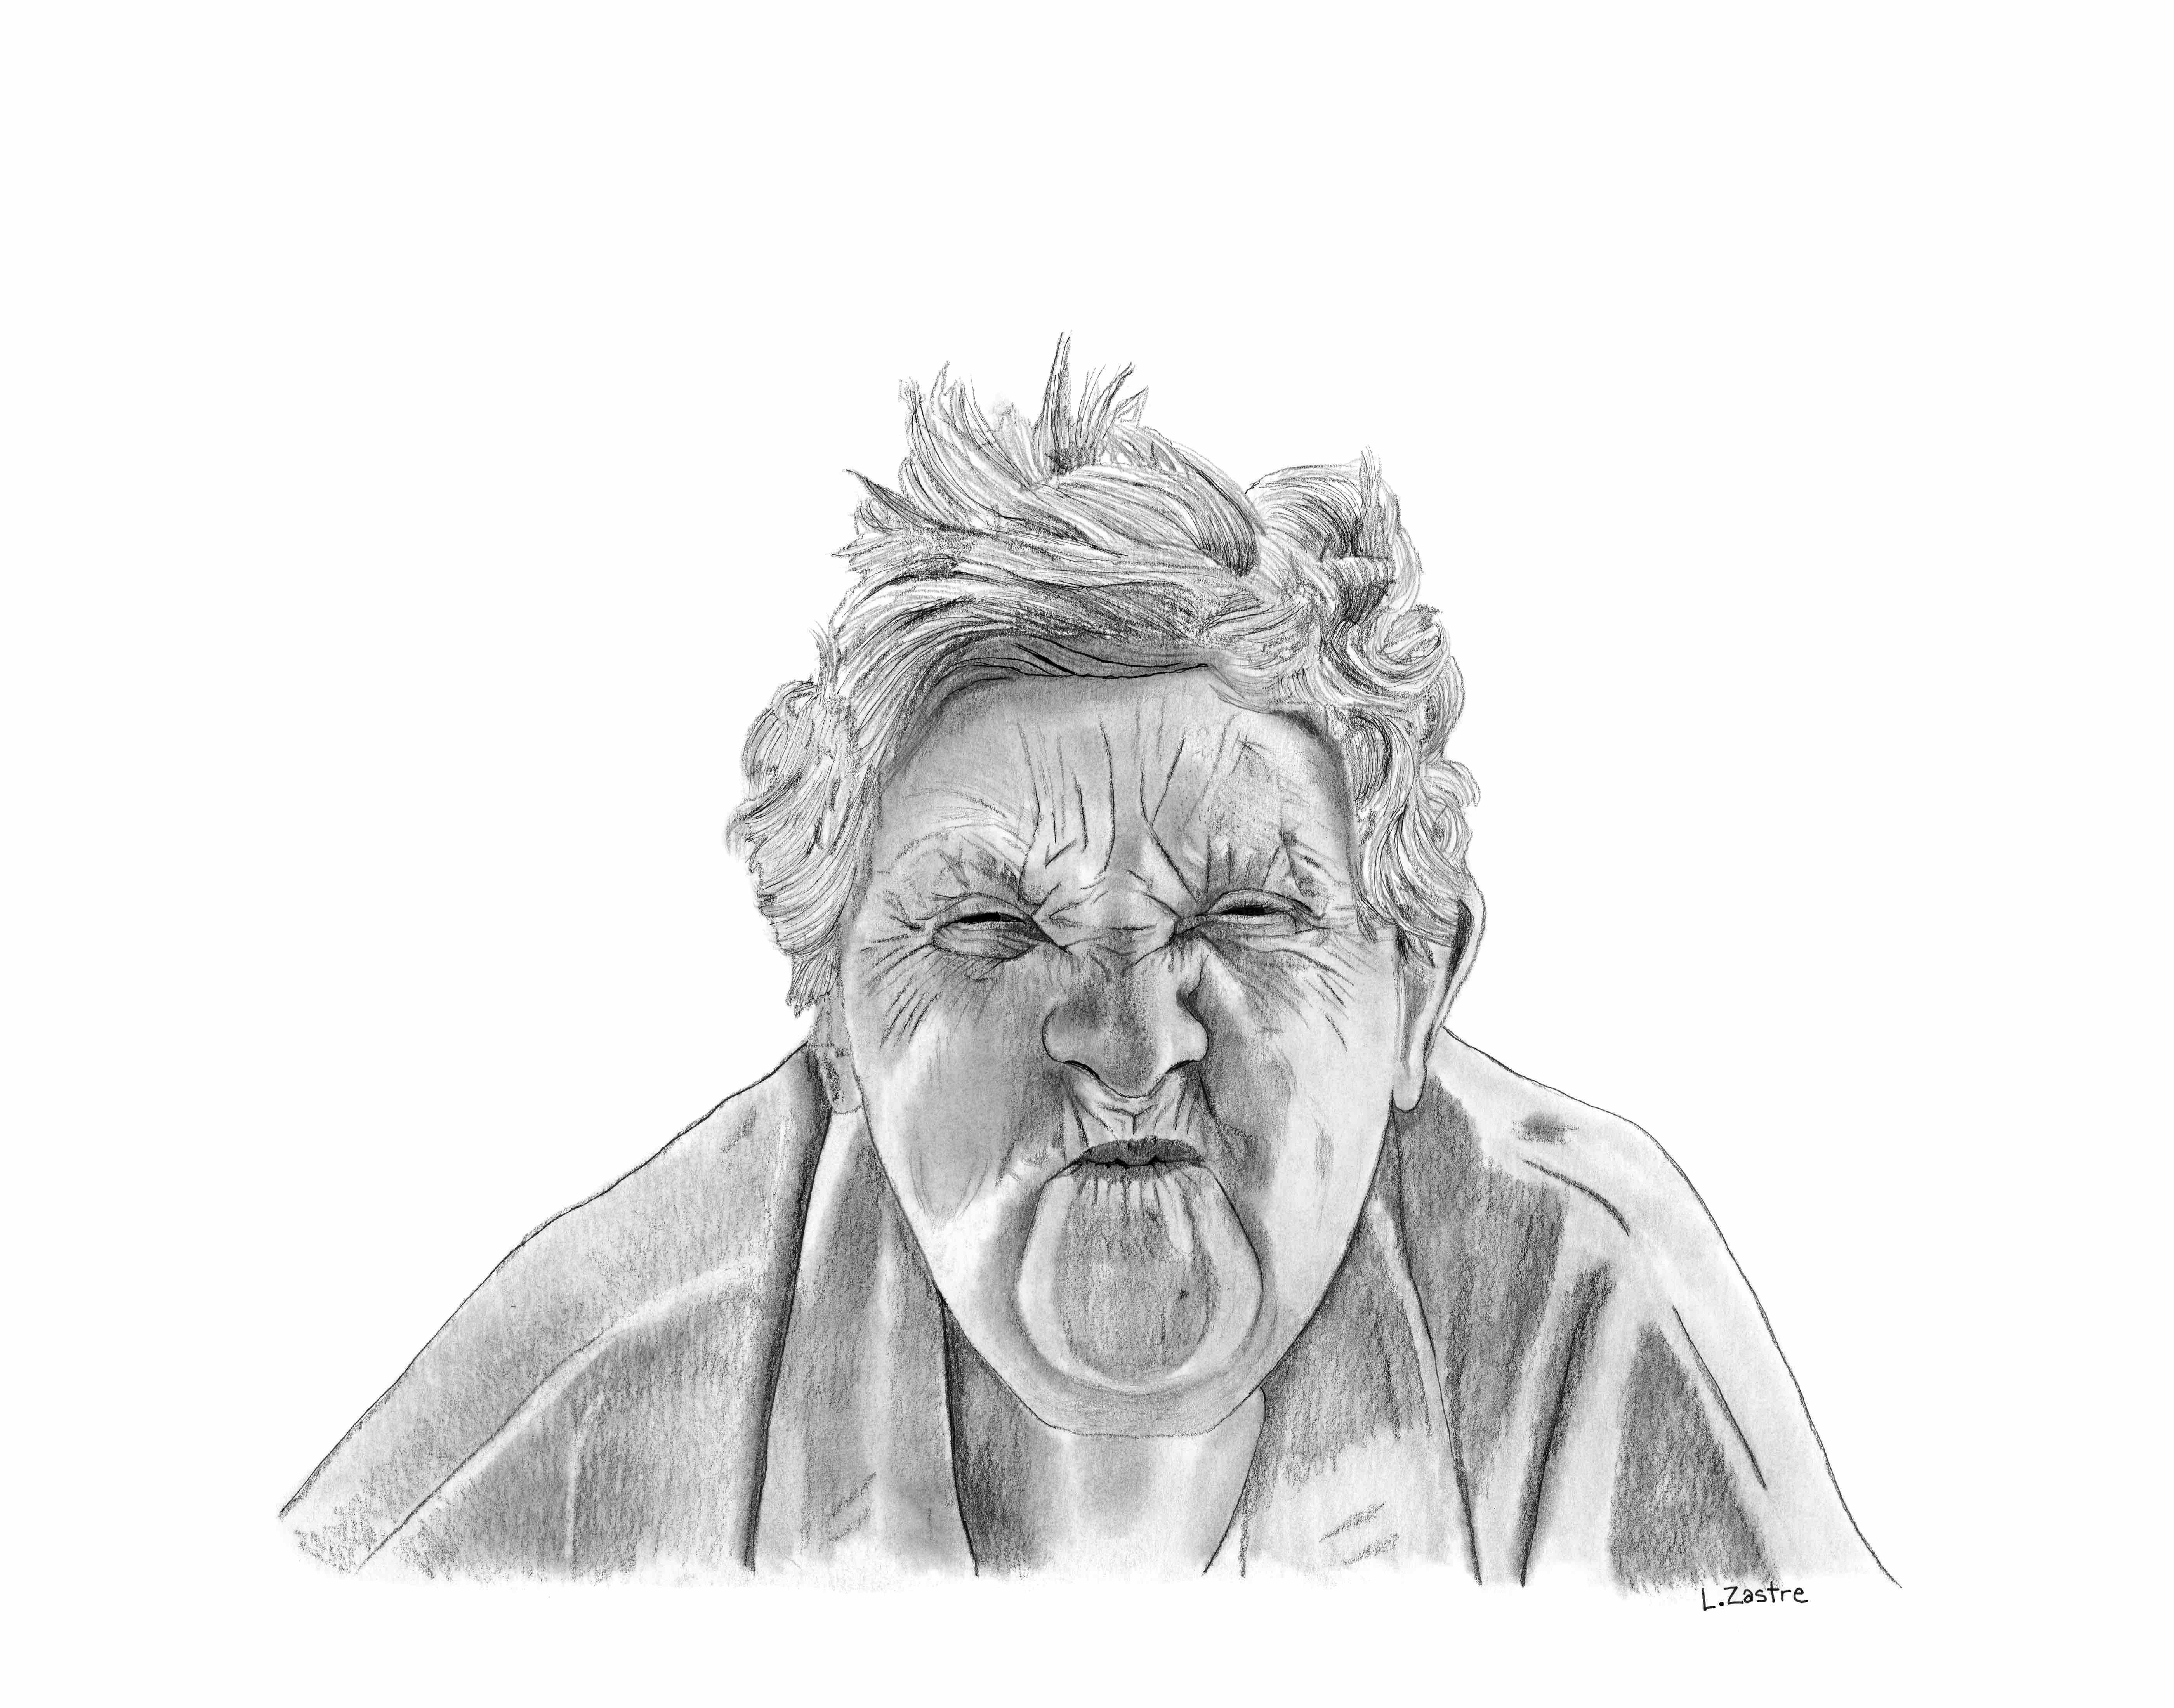 This is a portrait of an elderly person. Their hair is short and messy, and they wear a housecoat. They face us with eyes and mouth scrunched shut, cheeks puffed, like they are holding their breath.